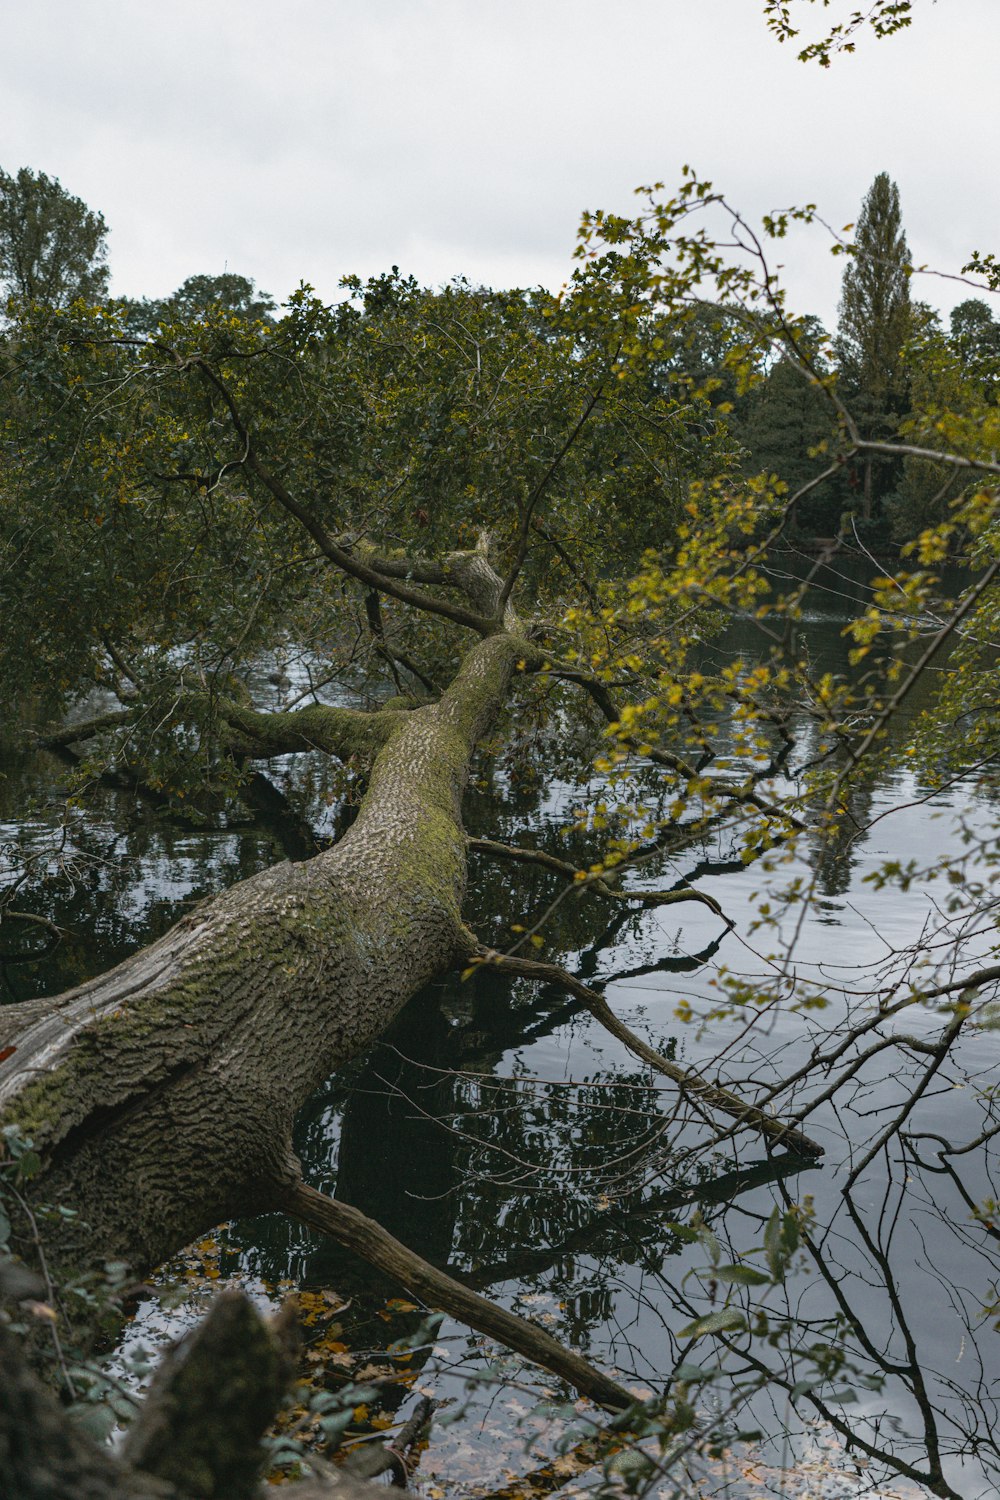 a tree that has fallen over in the water